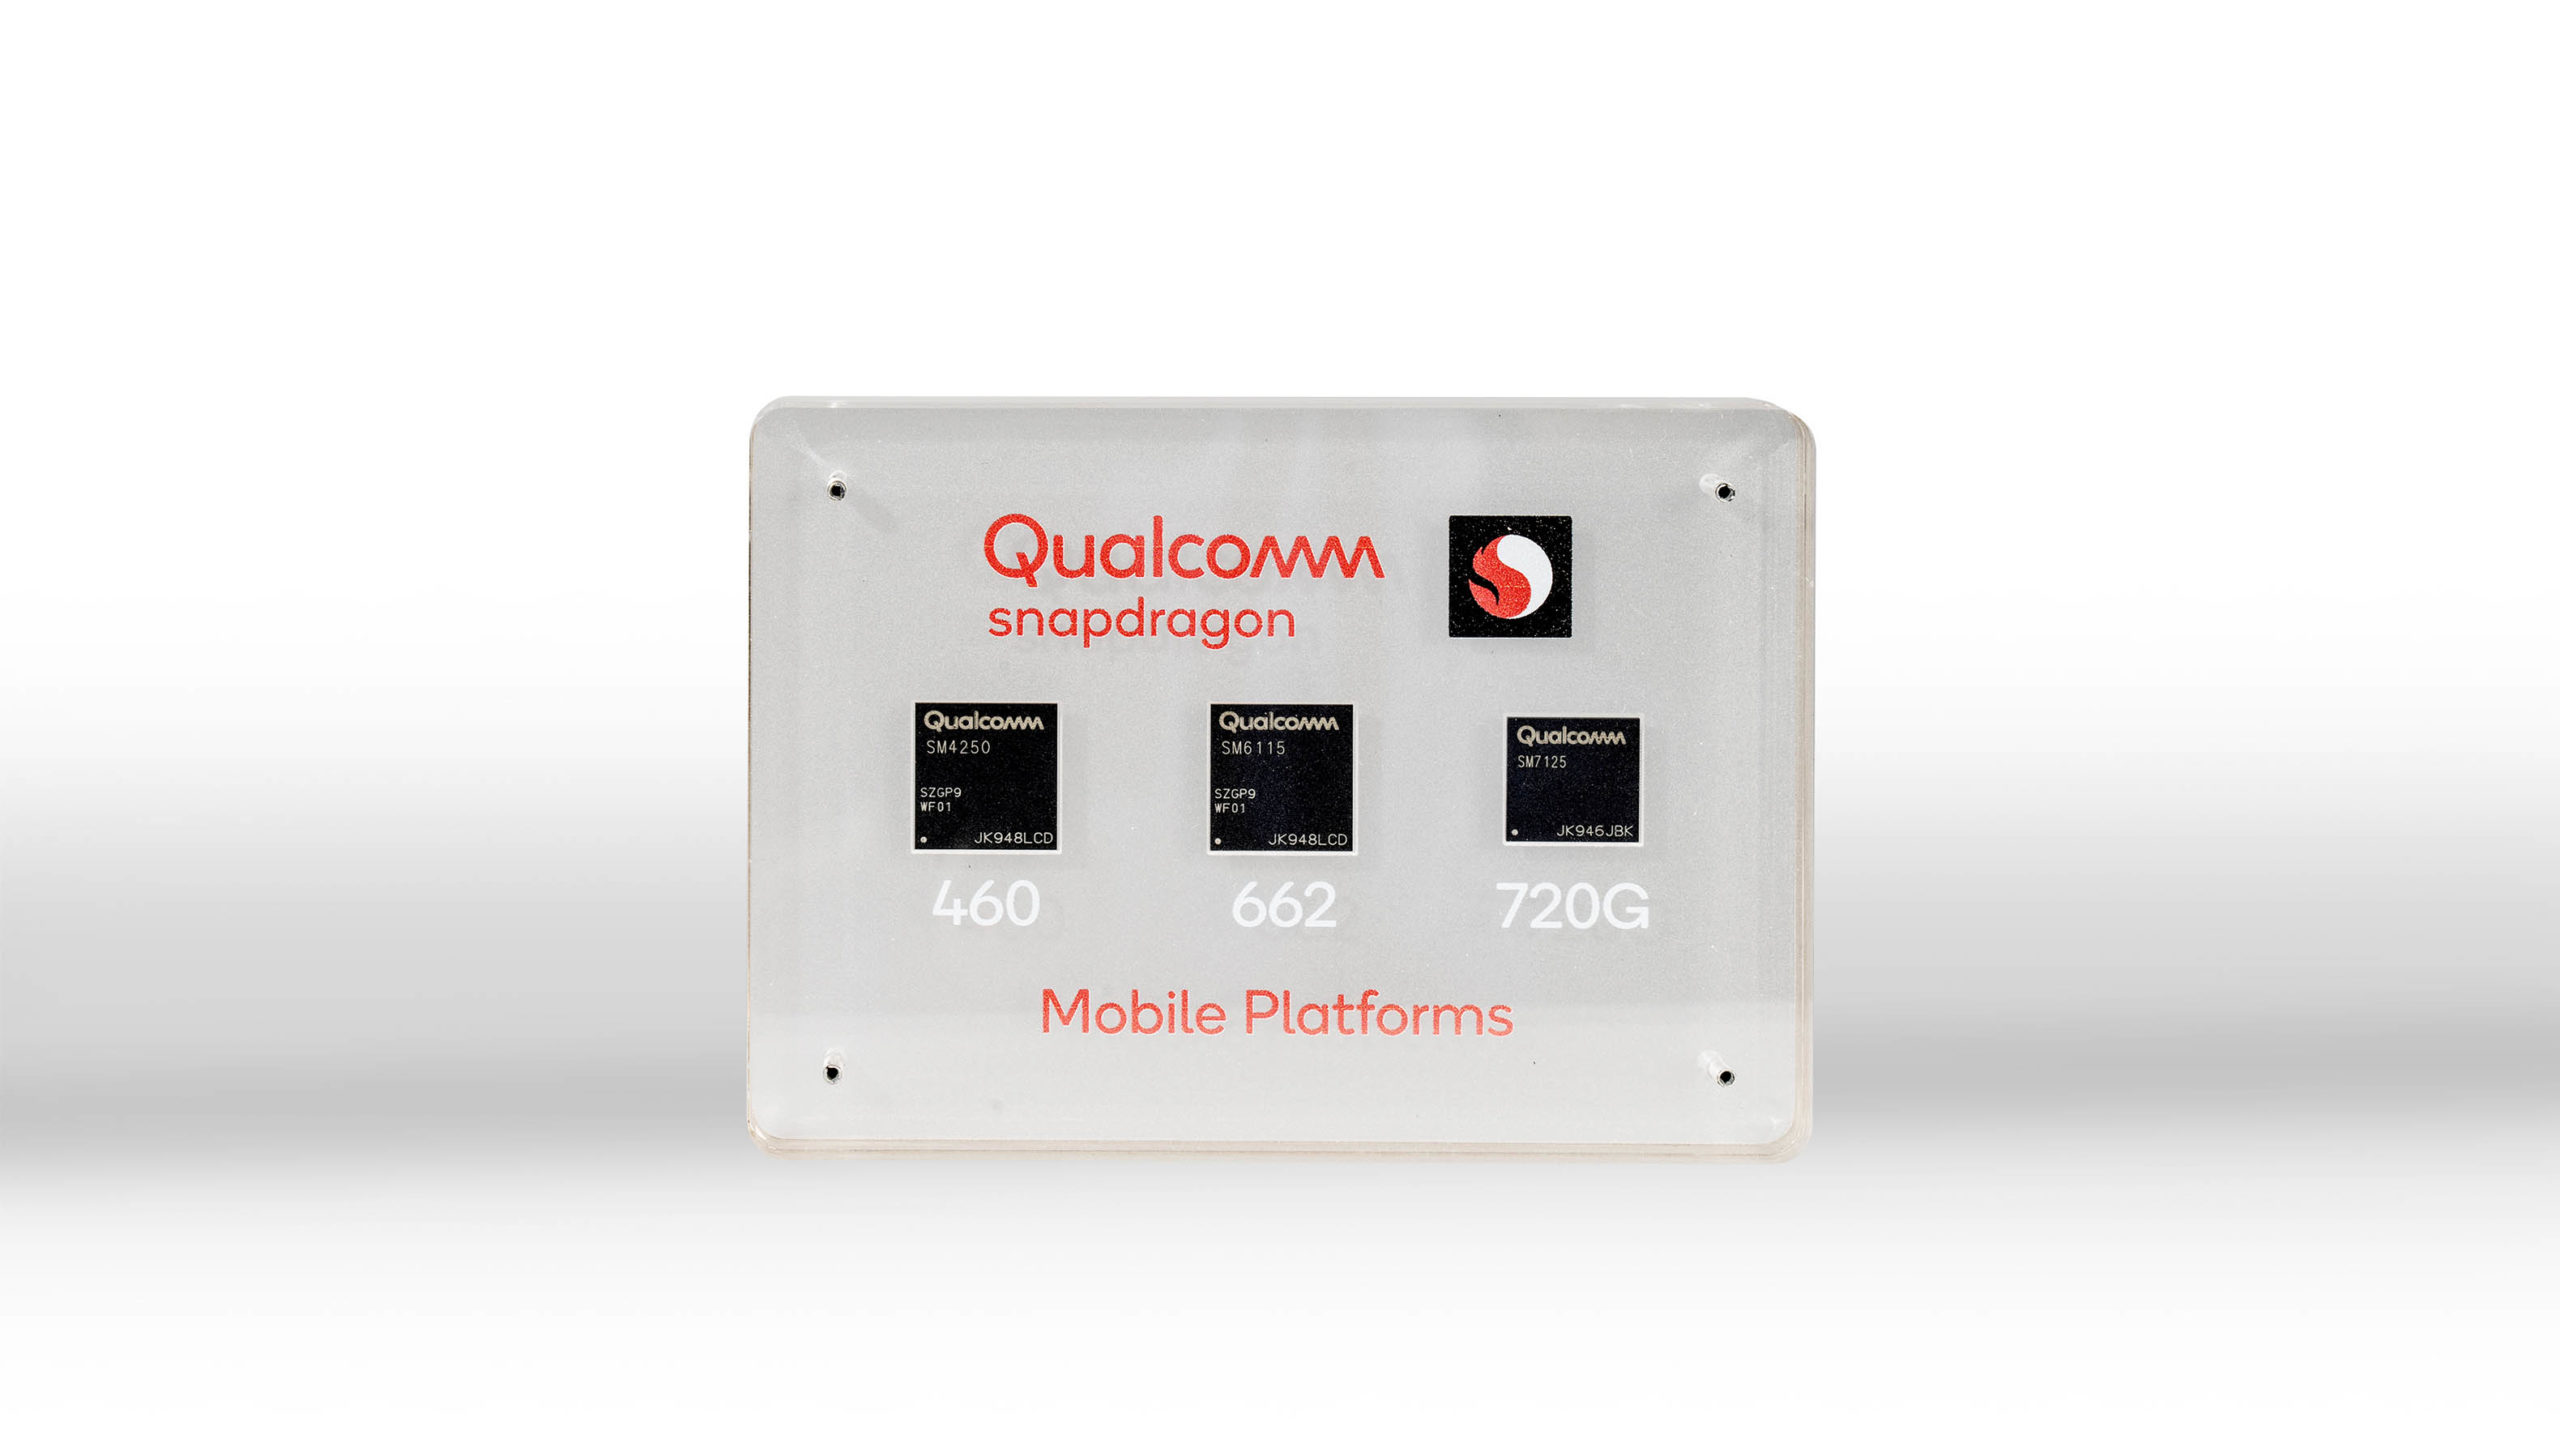 Qualcomm Snapdragon 720G, 662 and 460